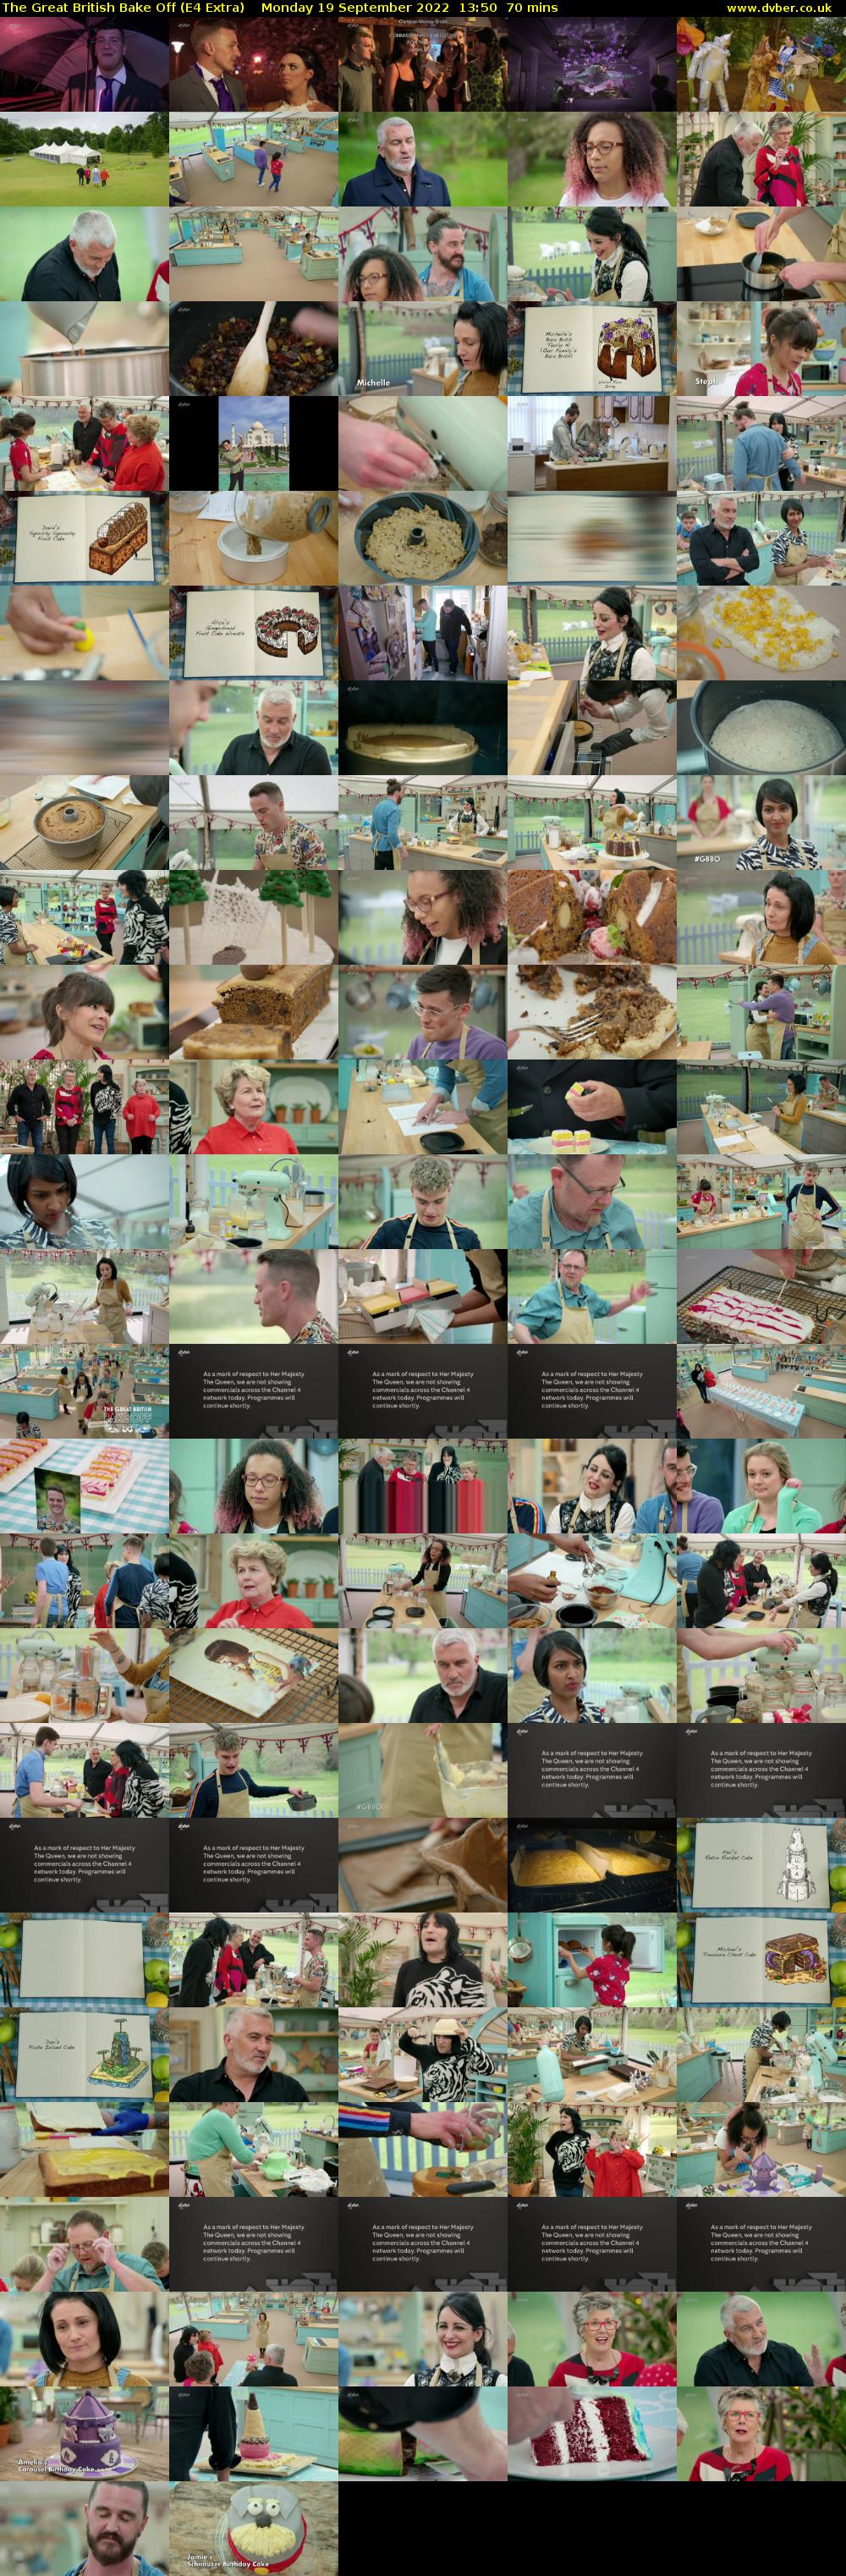 The Great British Bake Off (E4 Extra) Monday 19 September 2022 13:50 - 15:00